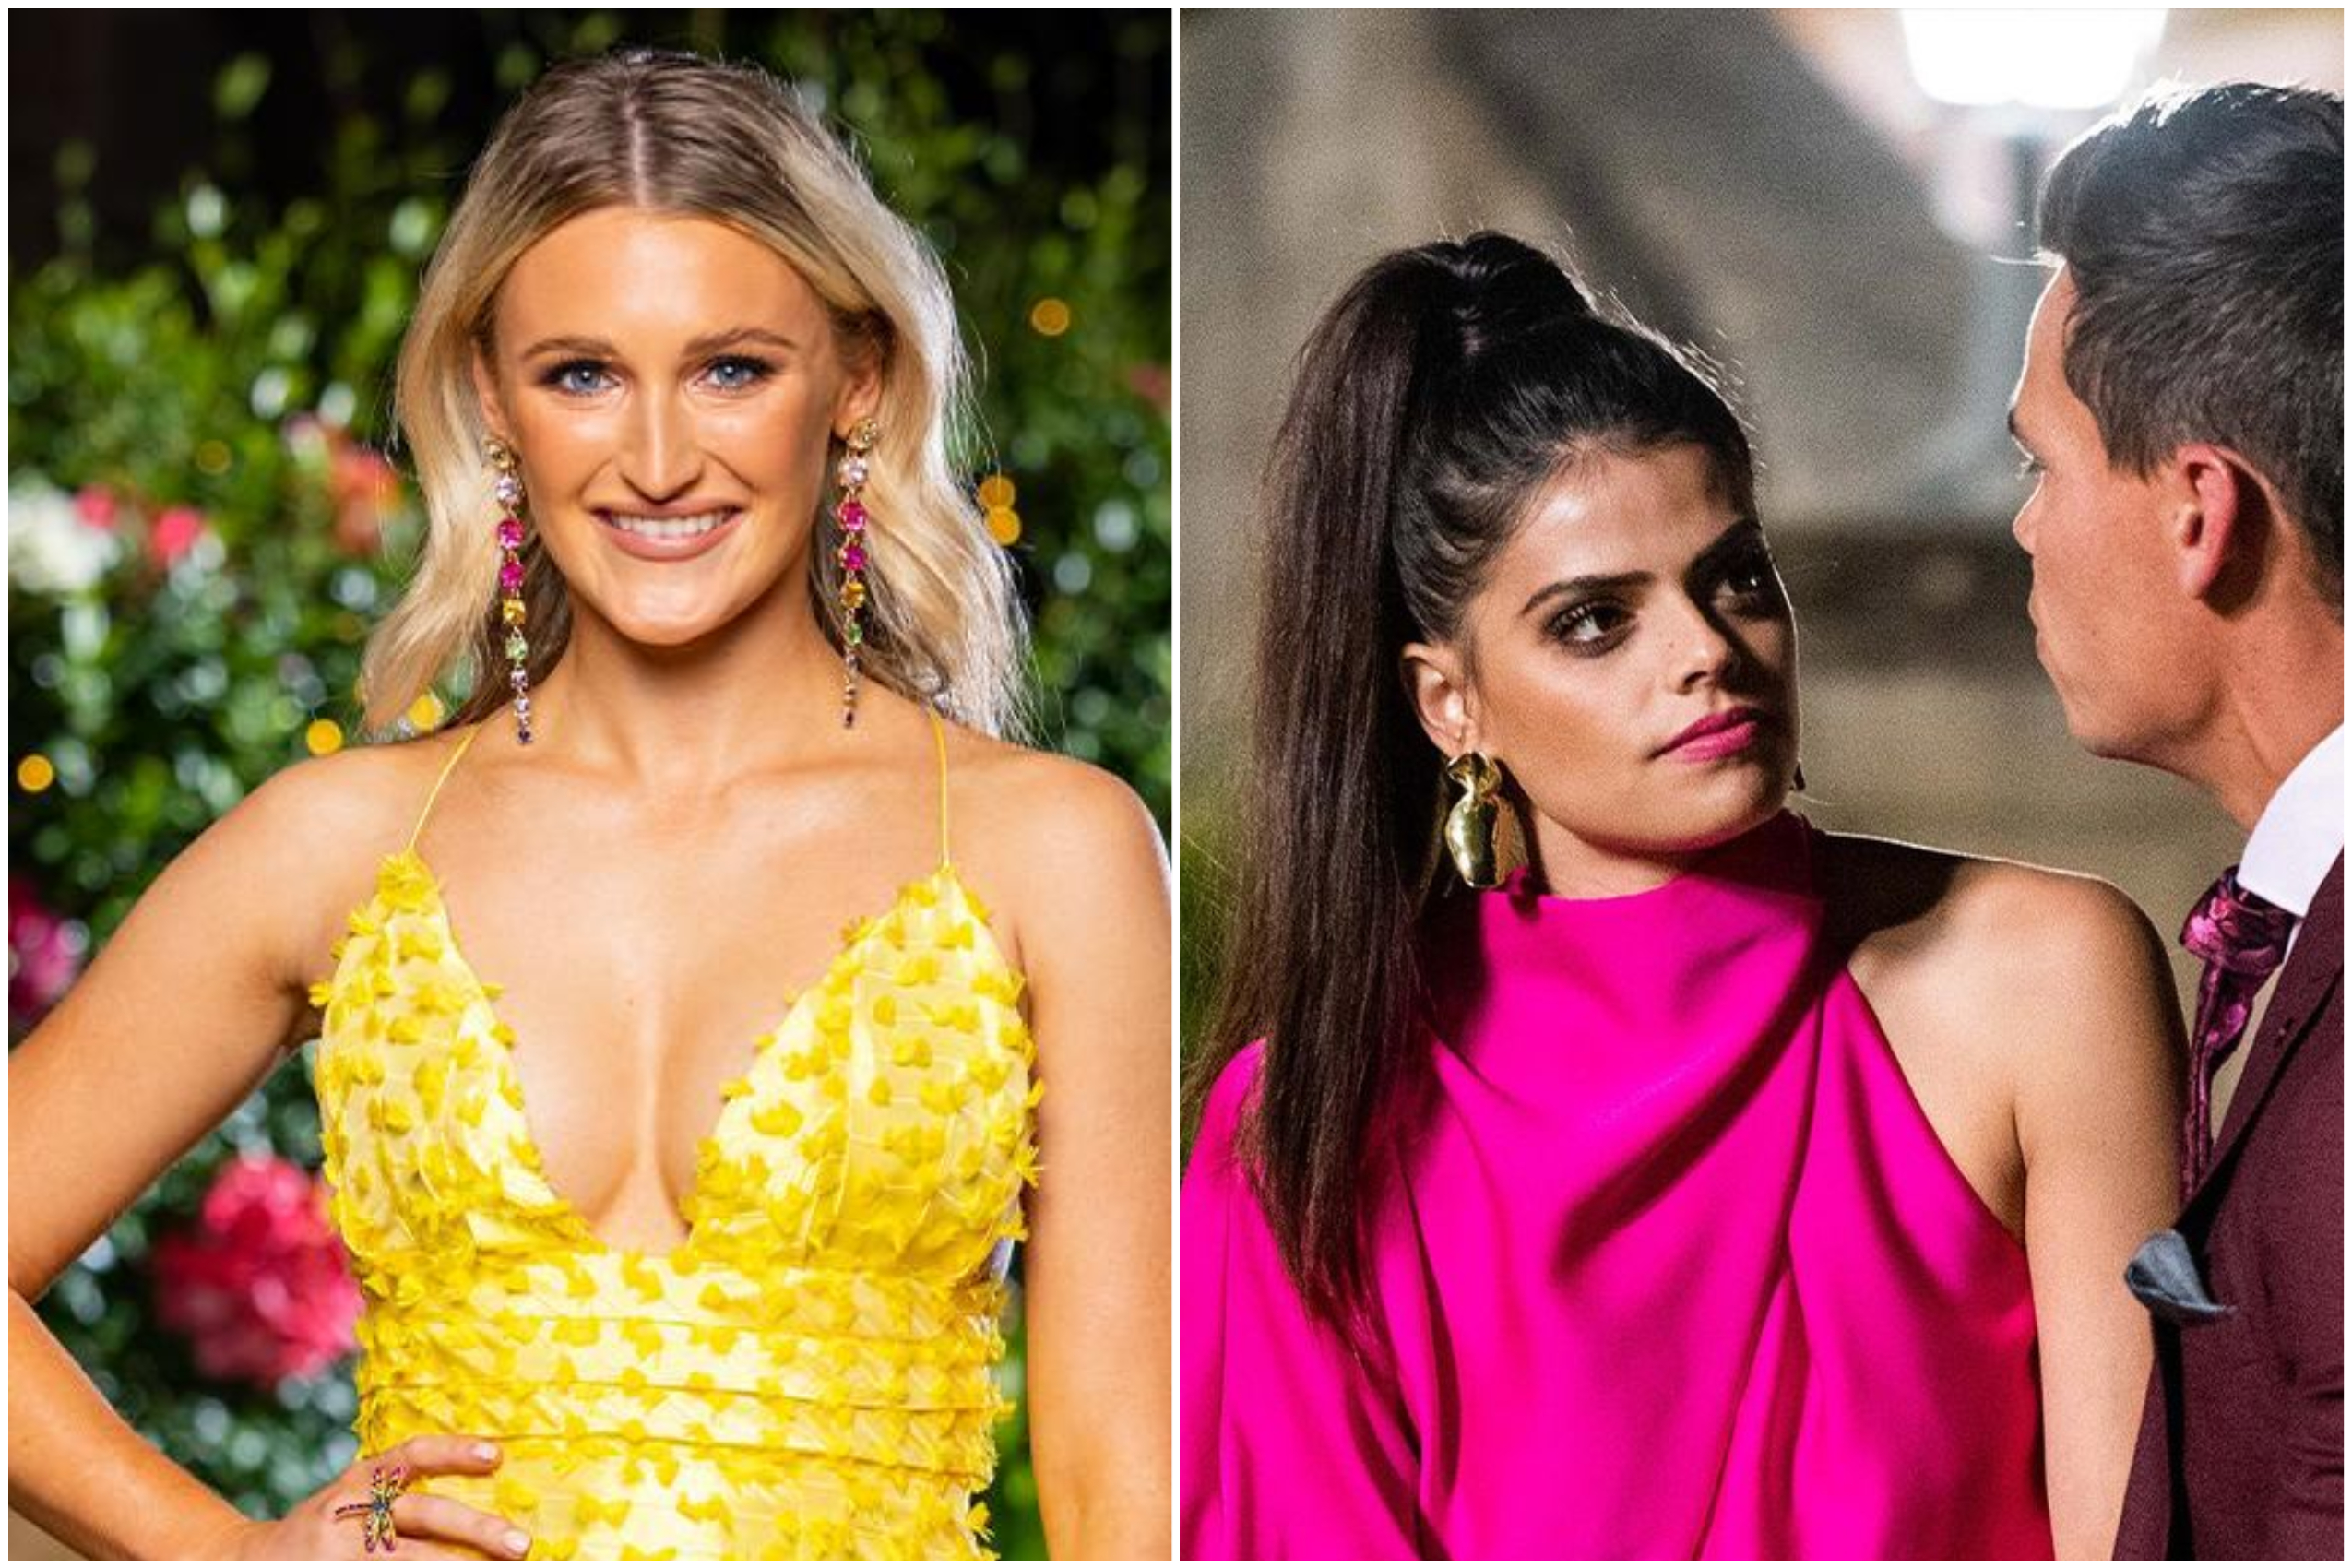 Lily Reckons Brooke Only Came Back To The Bachelor Because She Sees It As A Competition To Win